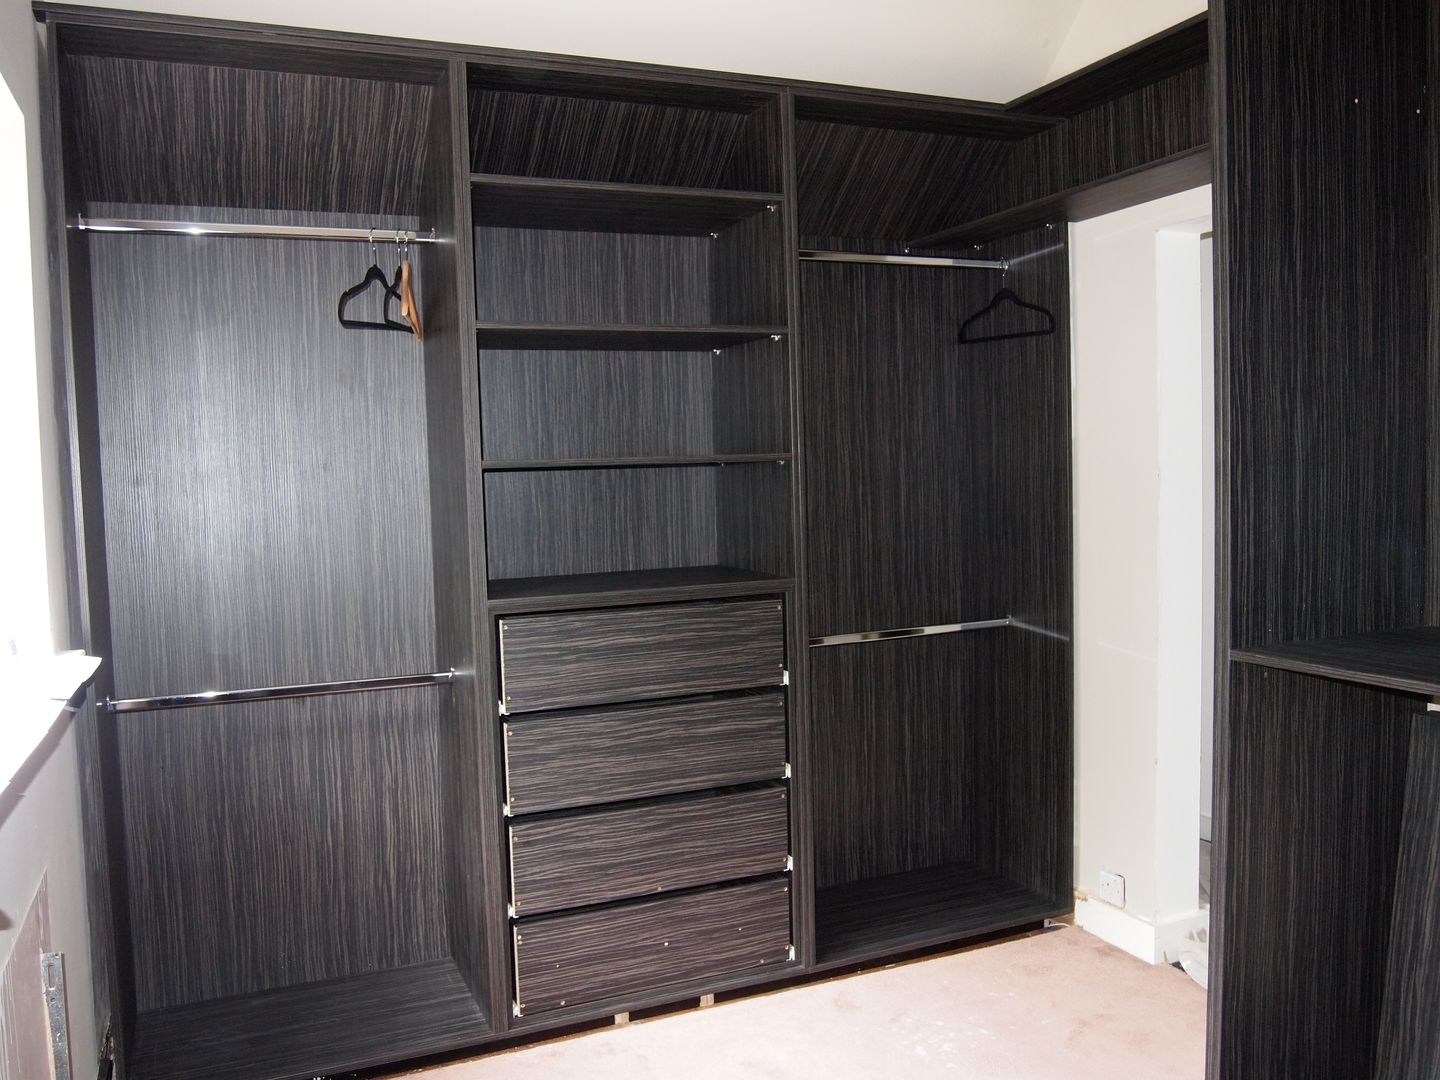 walk in his and her's wardrobes. before and after photos., Designer Vision and Sound: Bespoke Cabinet Making Designer Vision and Sound: Bespoke Cabinet Making Closets